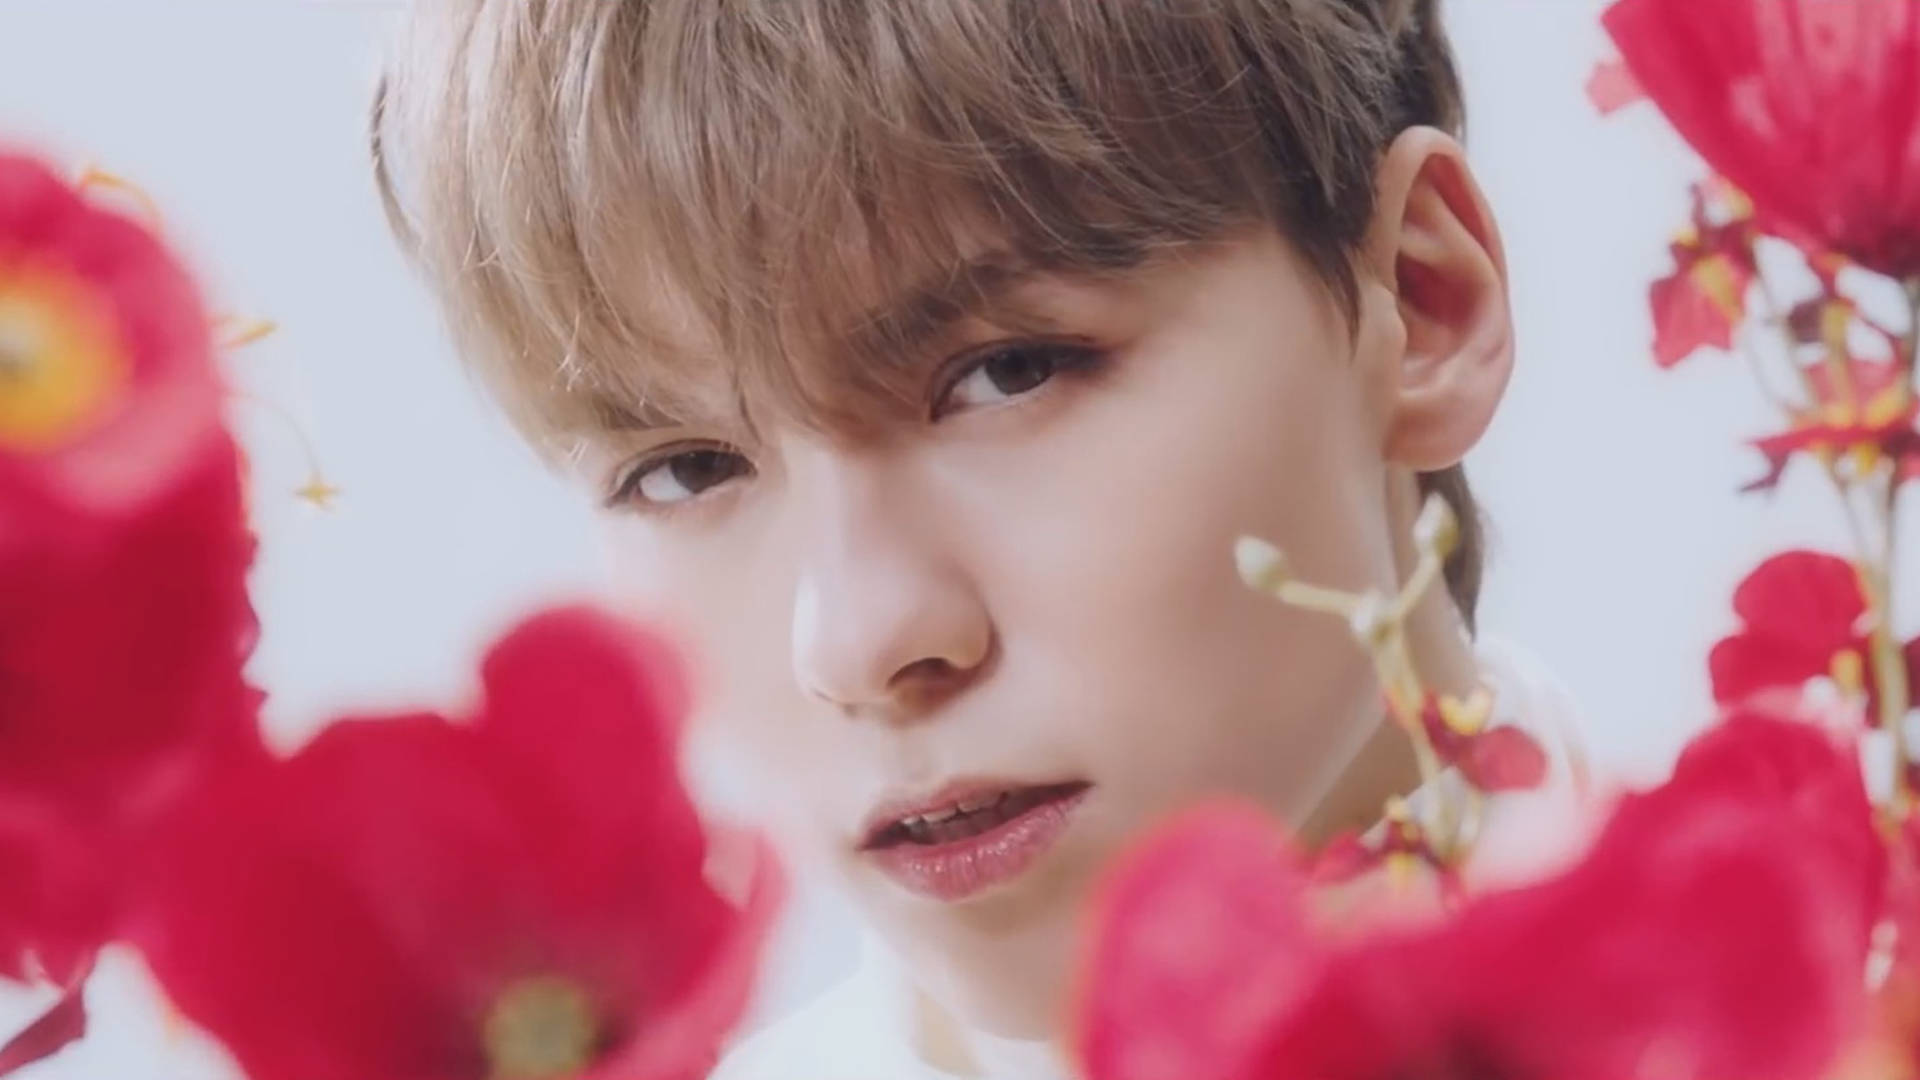 Vernon With Flowers